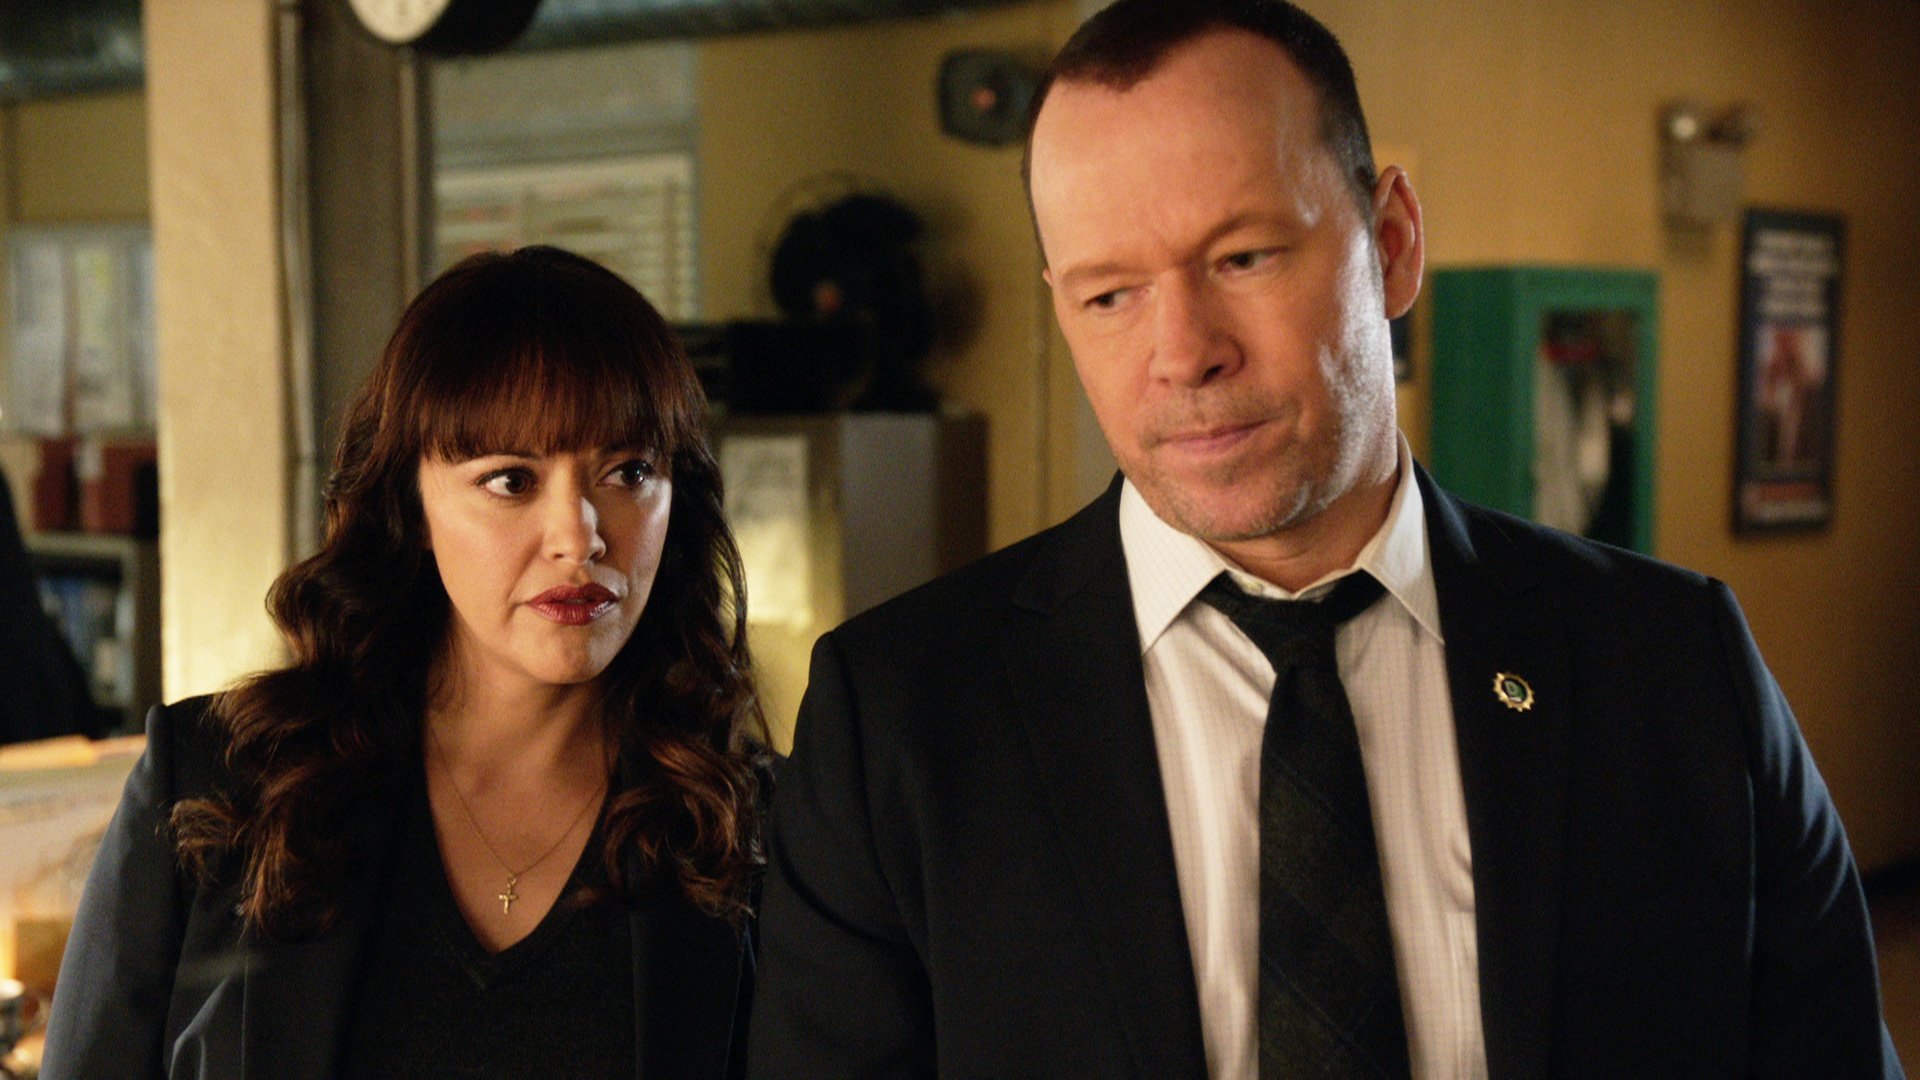 Marisa Ramirez as Maria Baez and Donnie Wahlberg as Danny Reagan on Blue Bloods